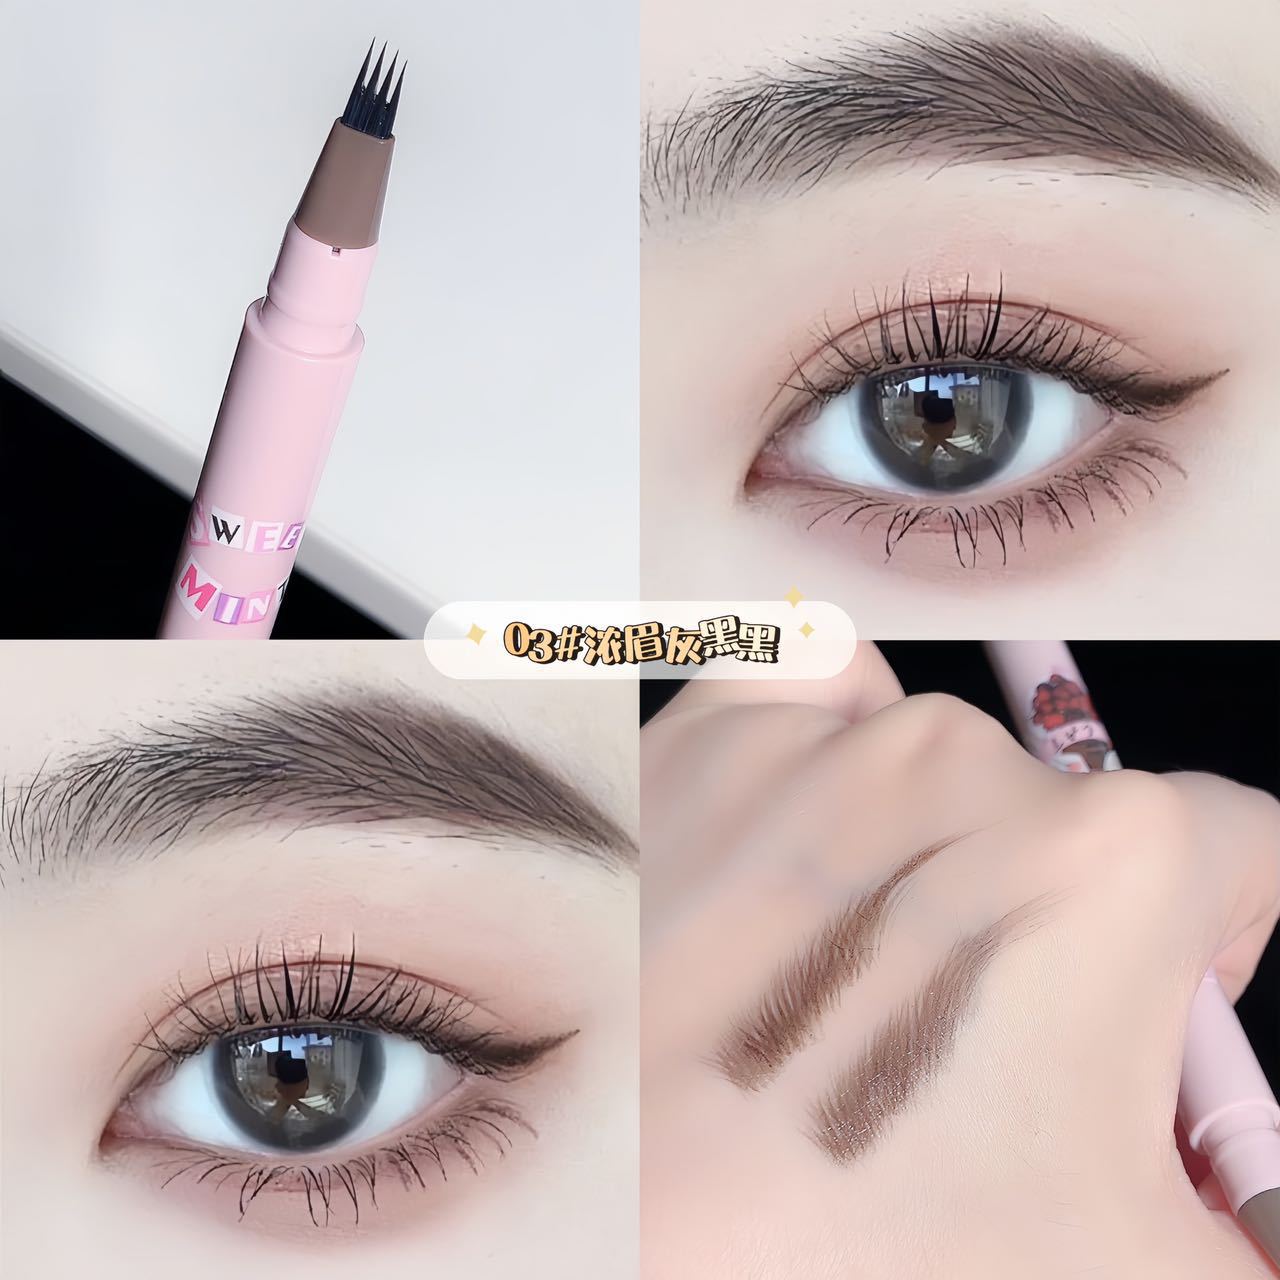 Sweet Mint Little Painter Water Eyebrow Pencil Waterproof Not Smudge Natural Simulation Wild Eyebrow Four Fork Eyebrow Pencil Wholesale